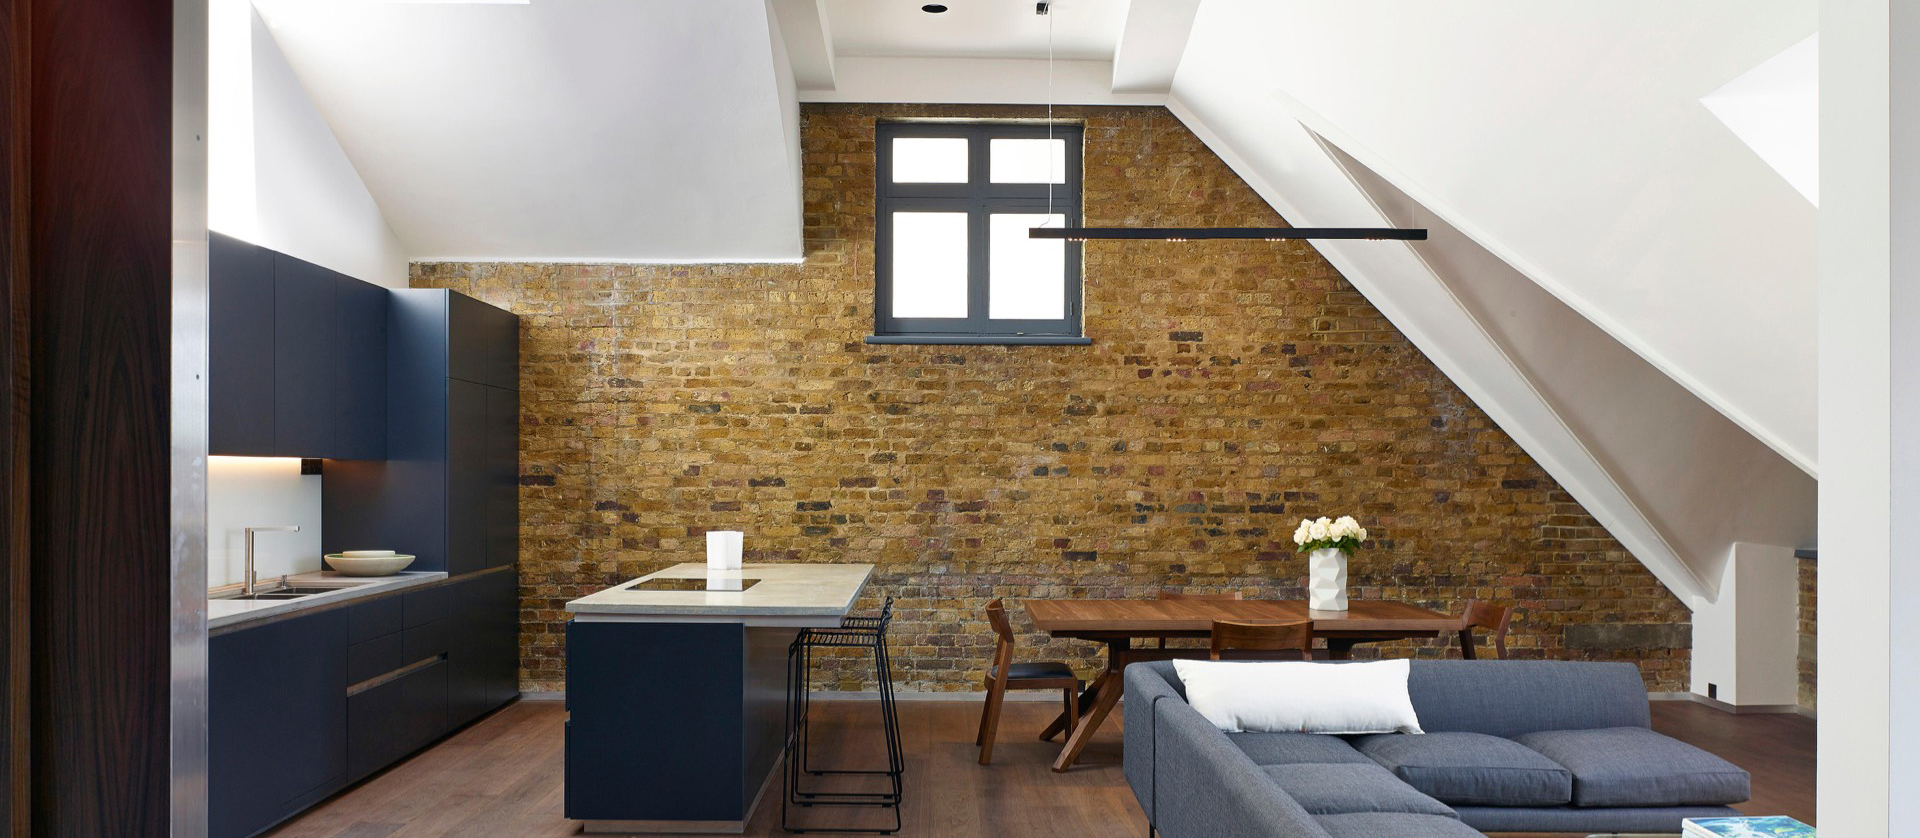 Bespoke Loft conversions with exposed brick wall